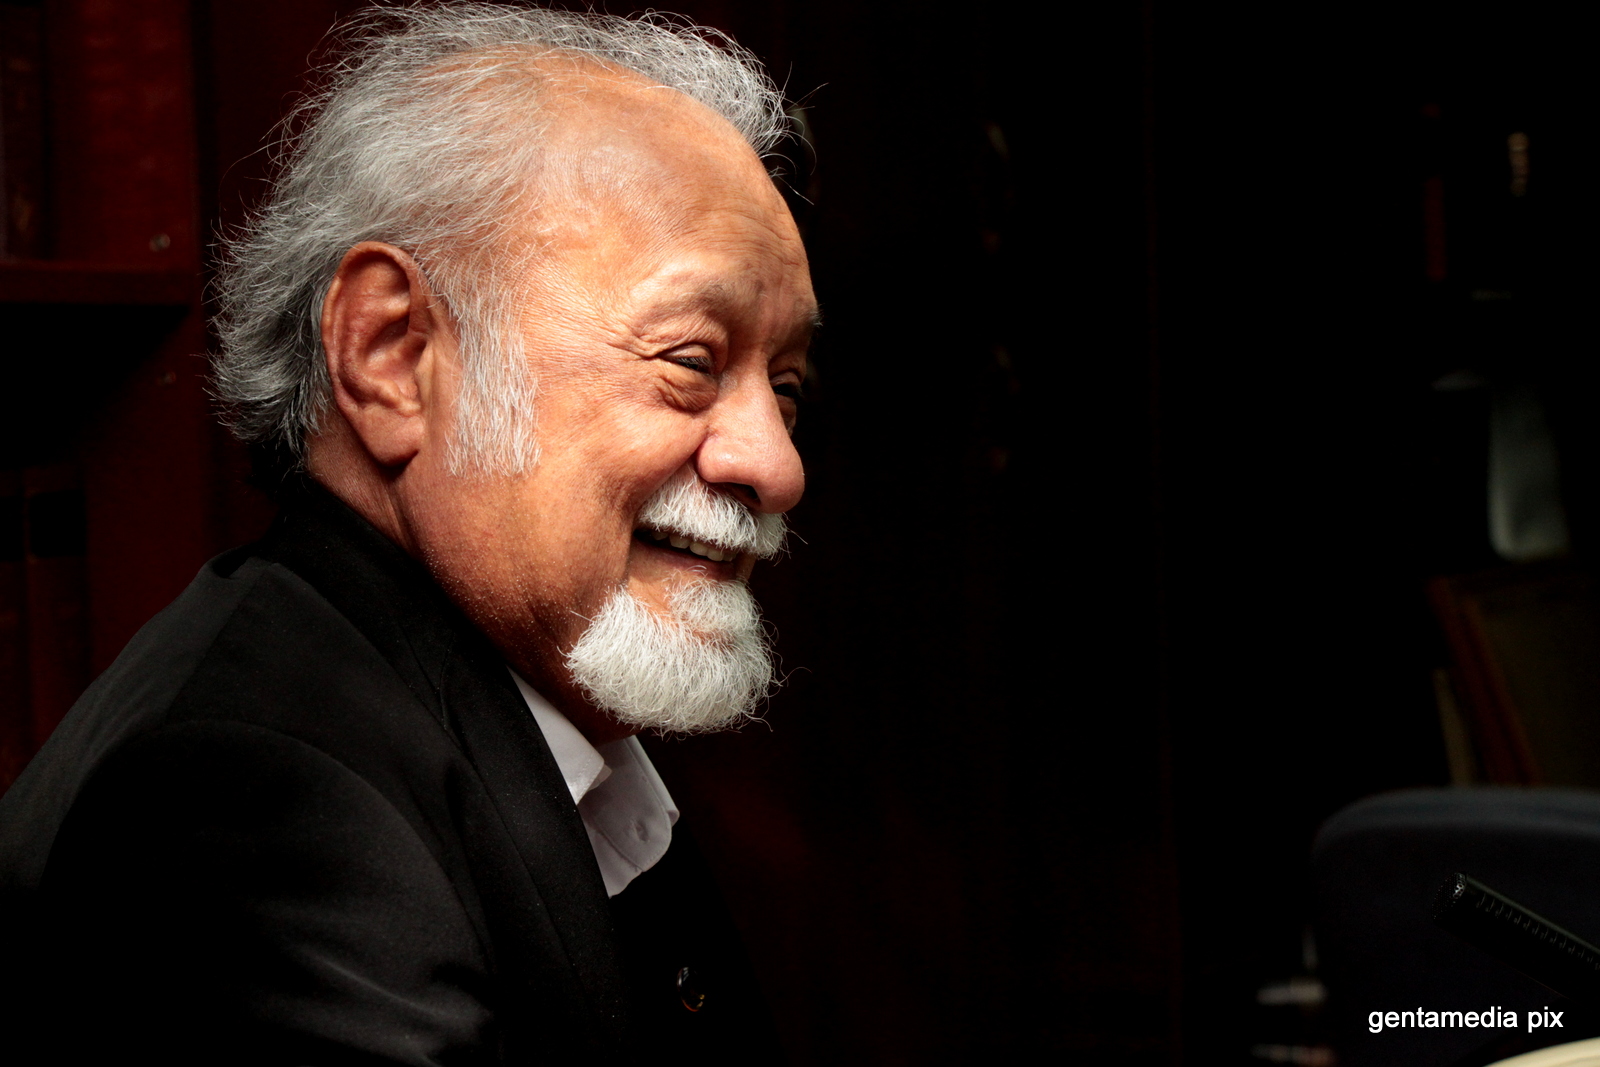 WIRA8965 - Is Karpal really the man for DAP right now?